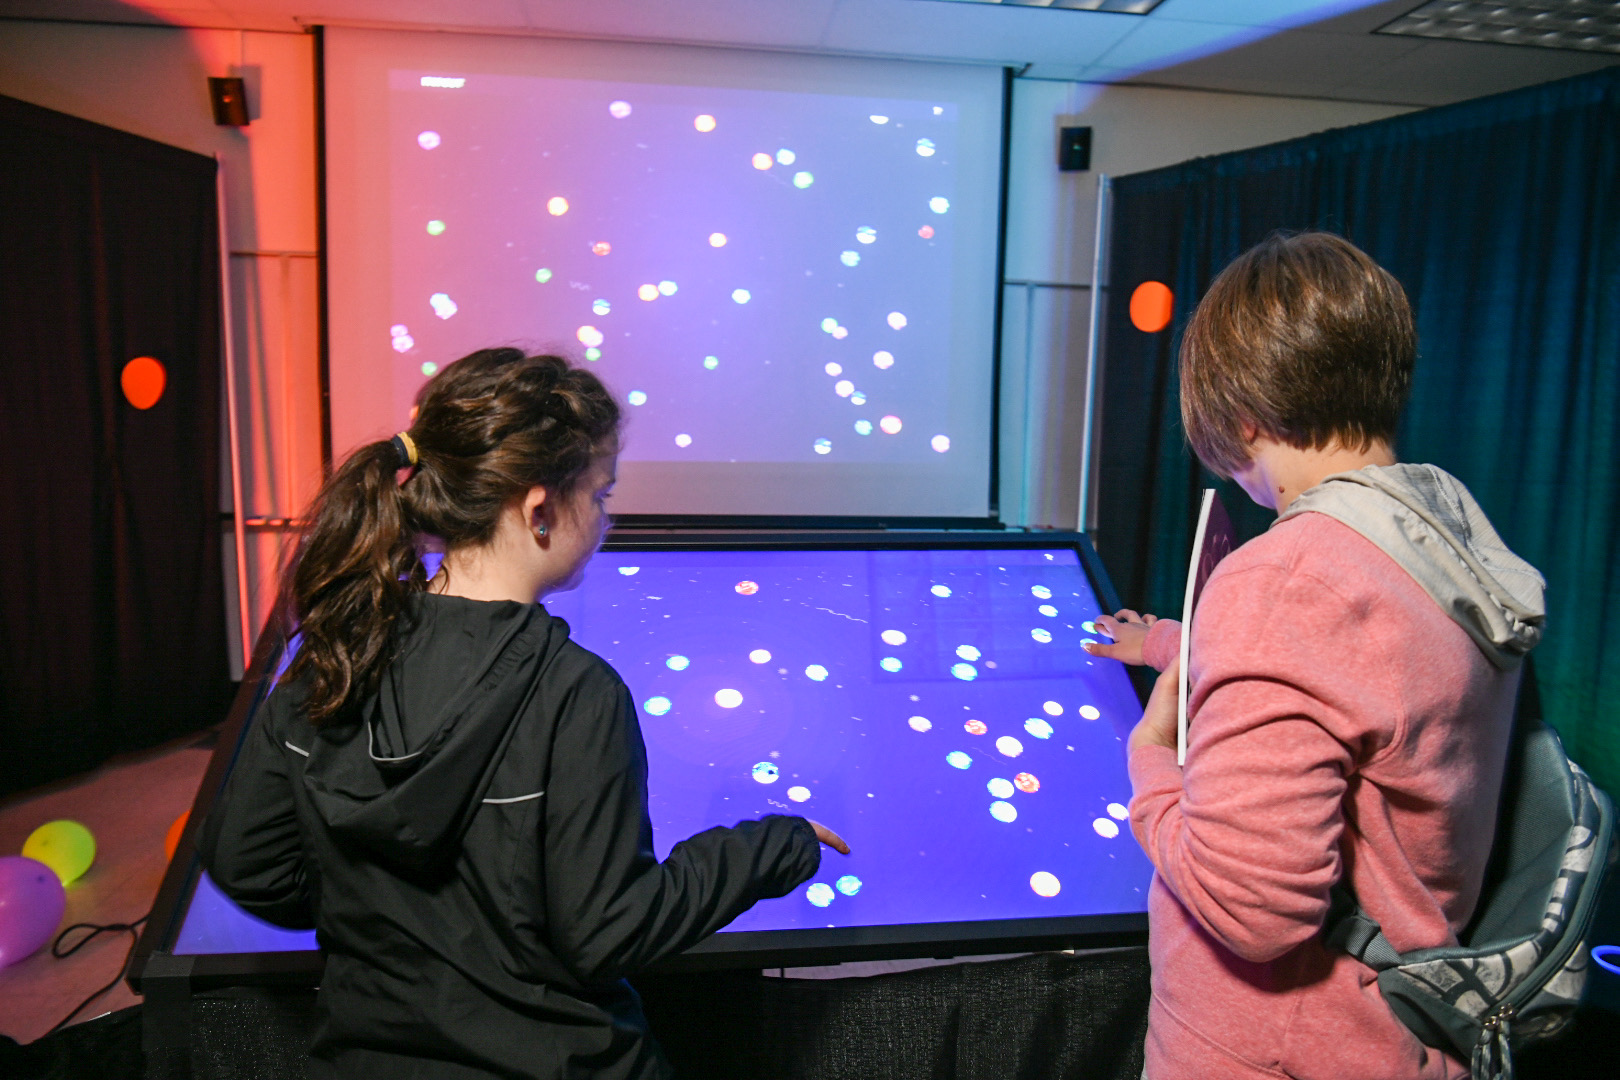 Two people interact with a digital display on a large screen.